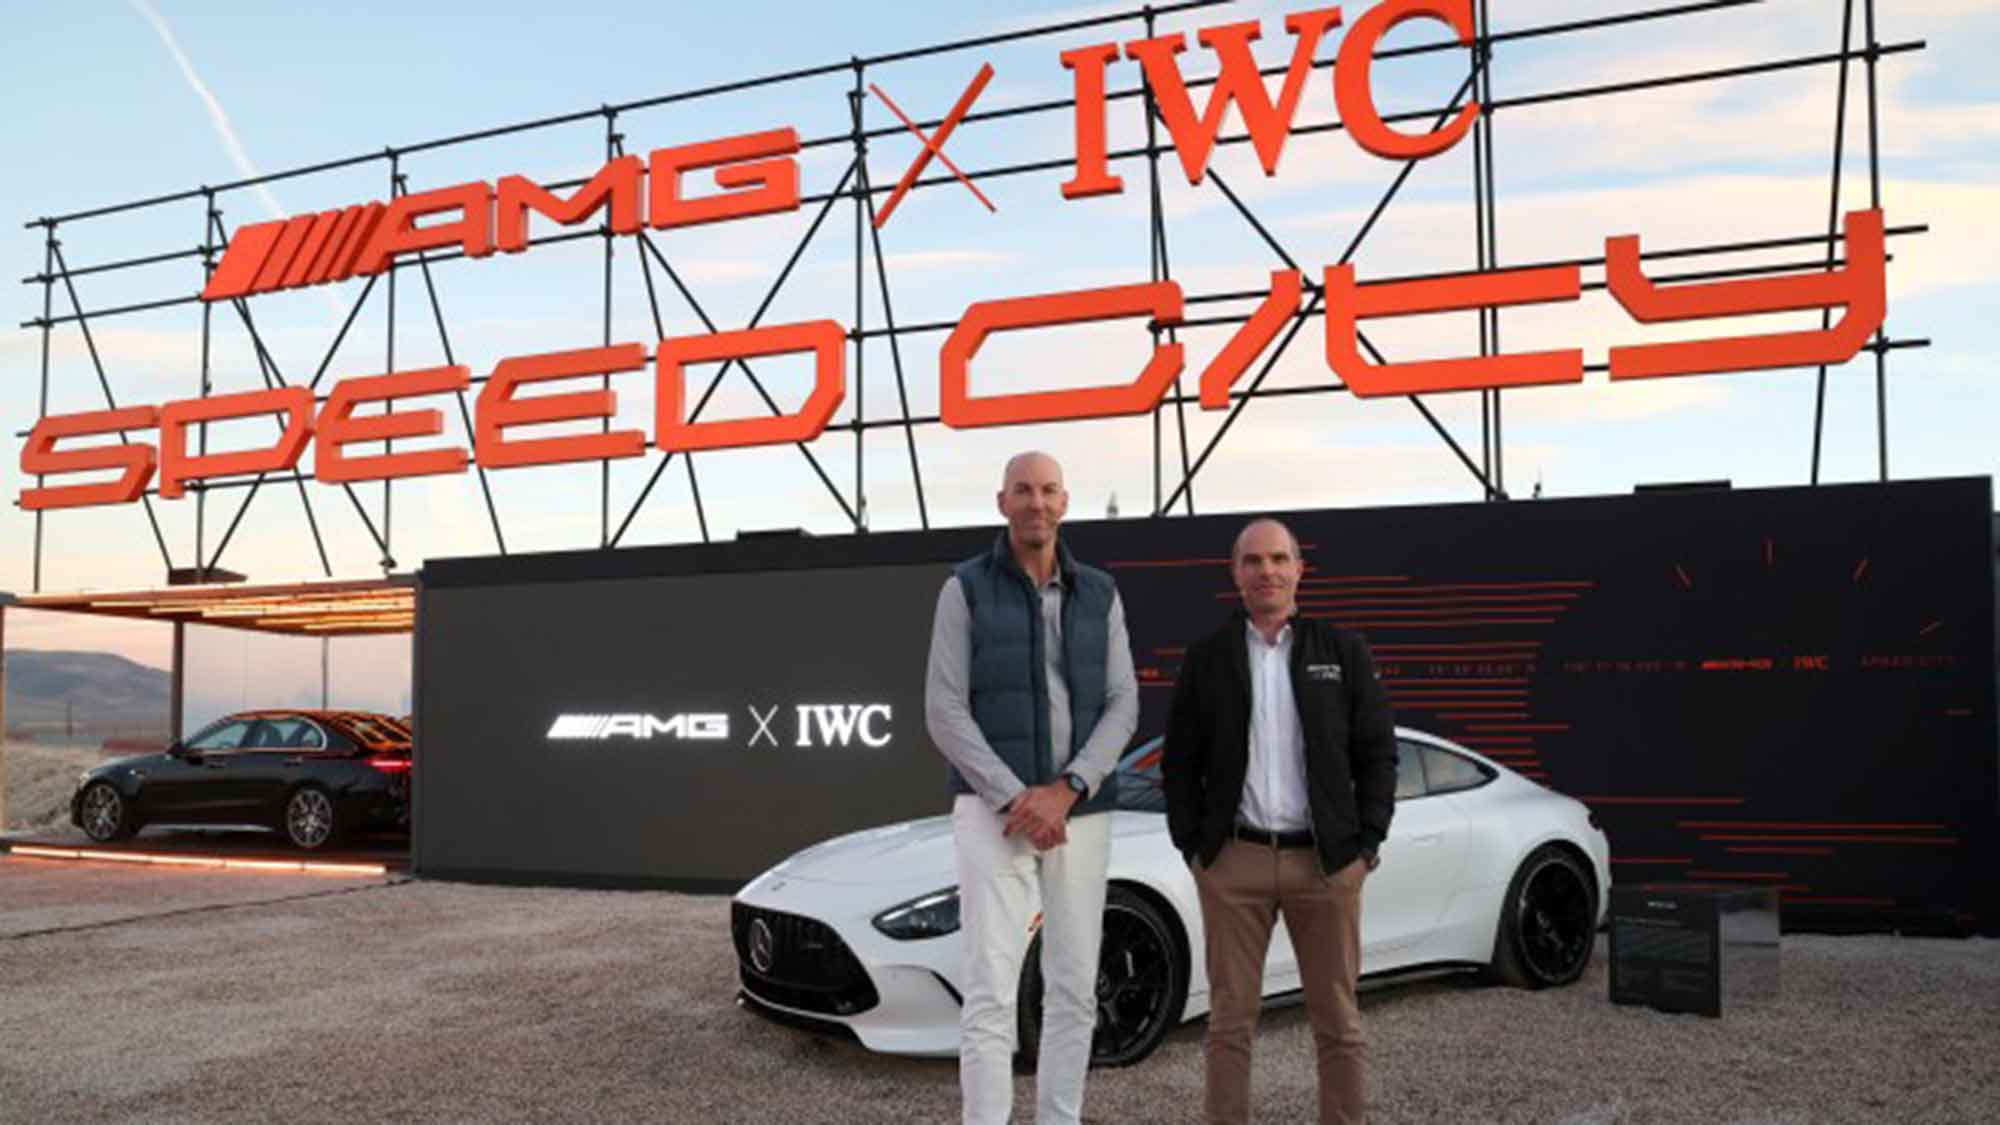 Lewis Hamilton and George Russell Join IWC Schaffhausen and Mercedes AMG as they Celebrate Their Partnership At “Speed City”